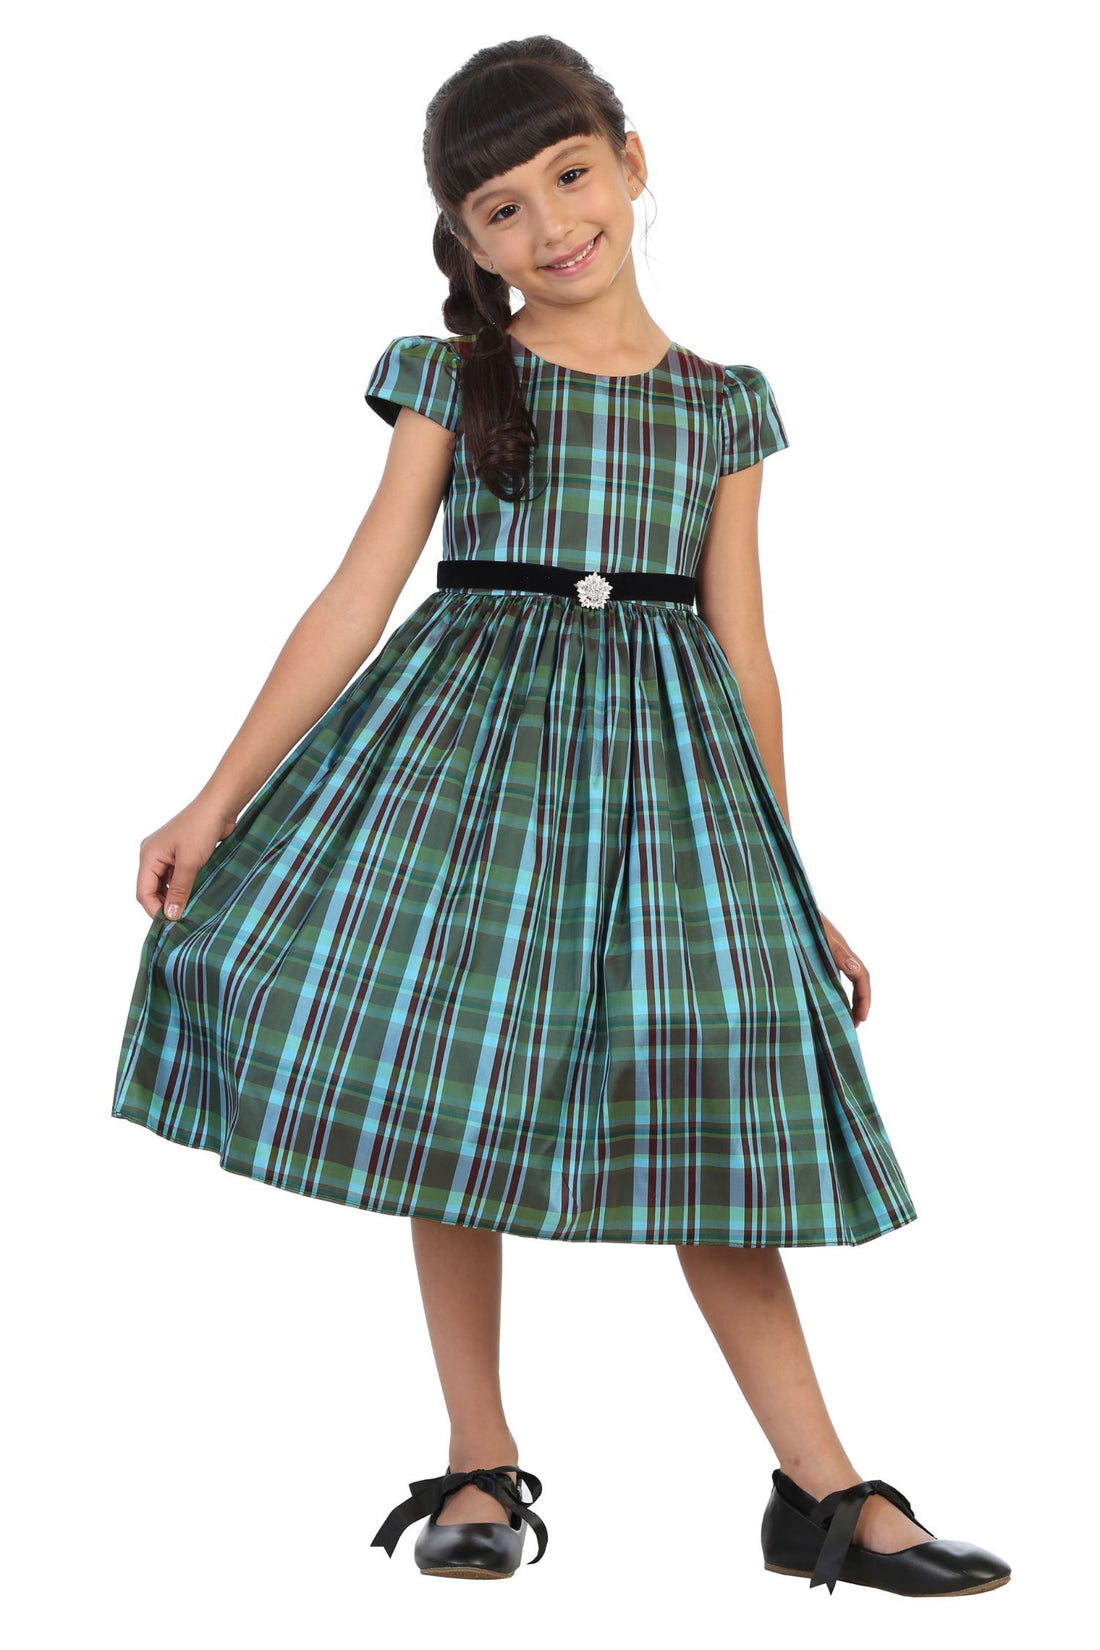 Classic Plaid Sleeve Girl Party Dress by AS495C Kids Dream - Girl Formal Dresses